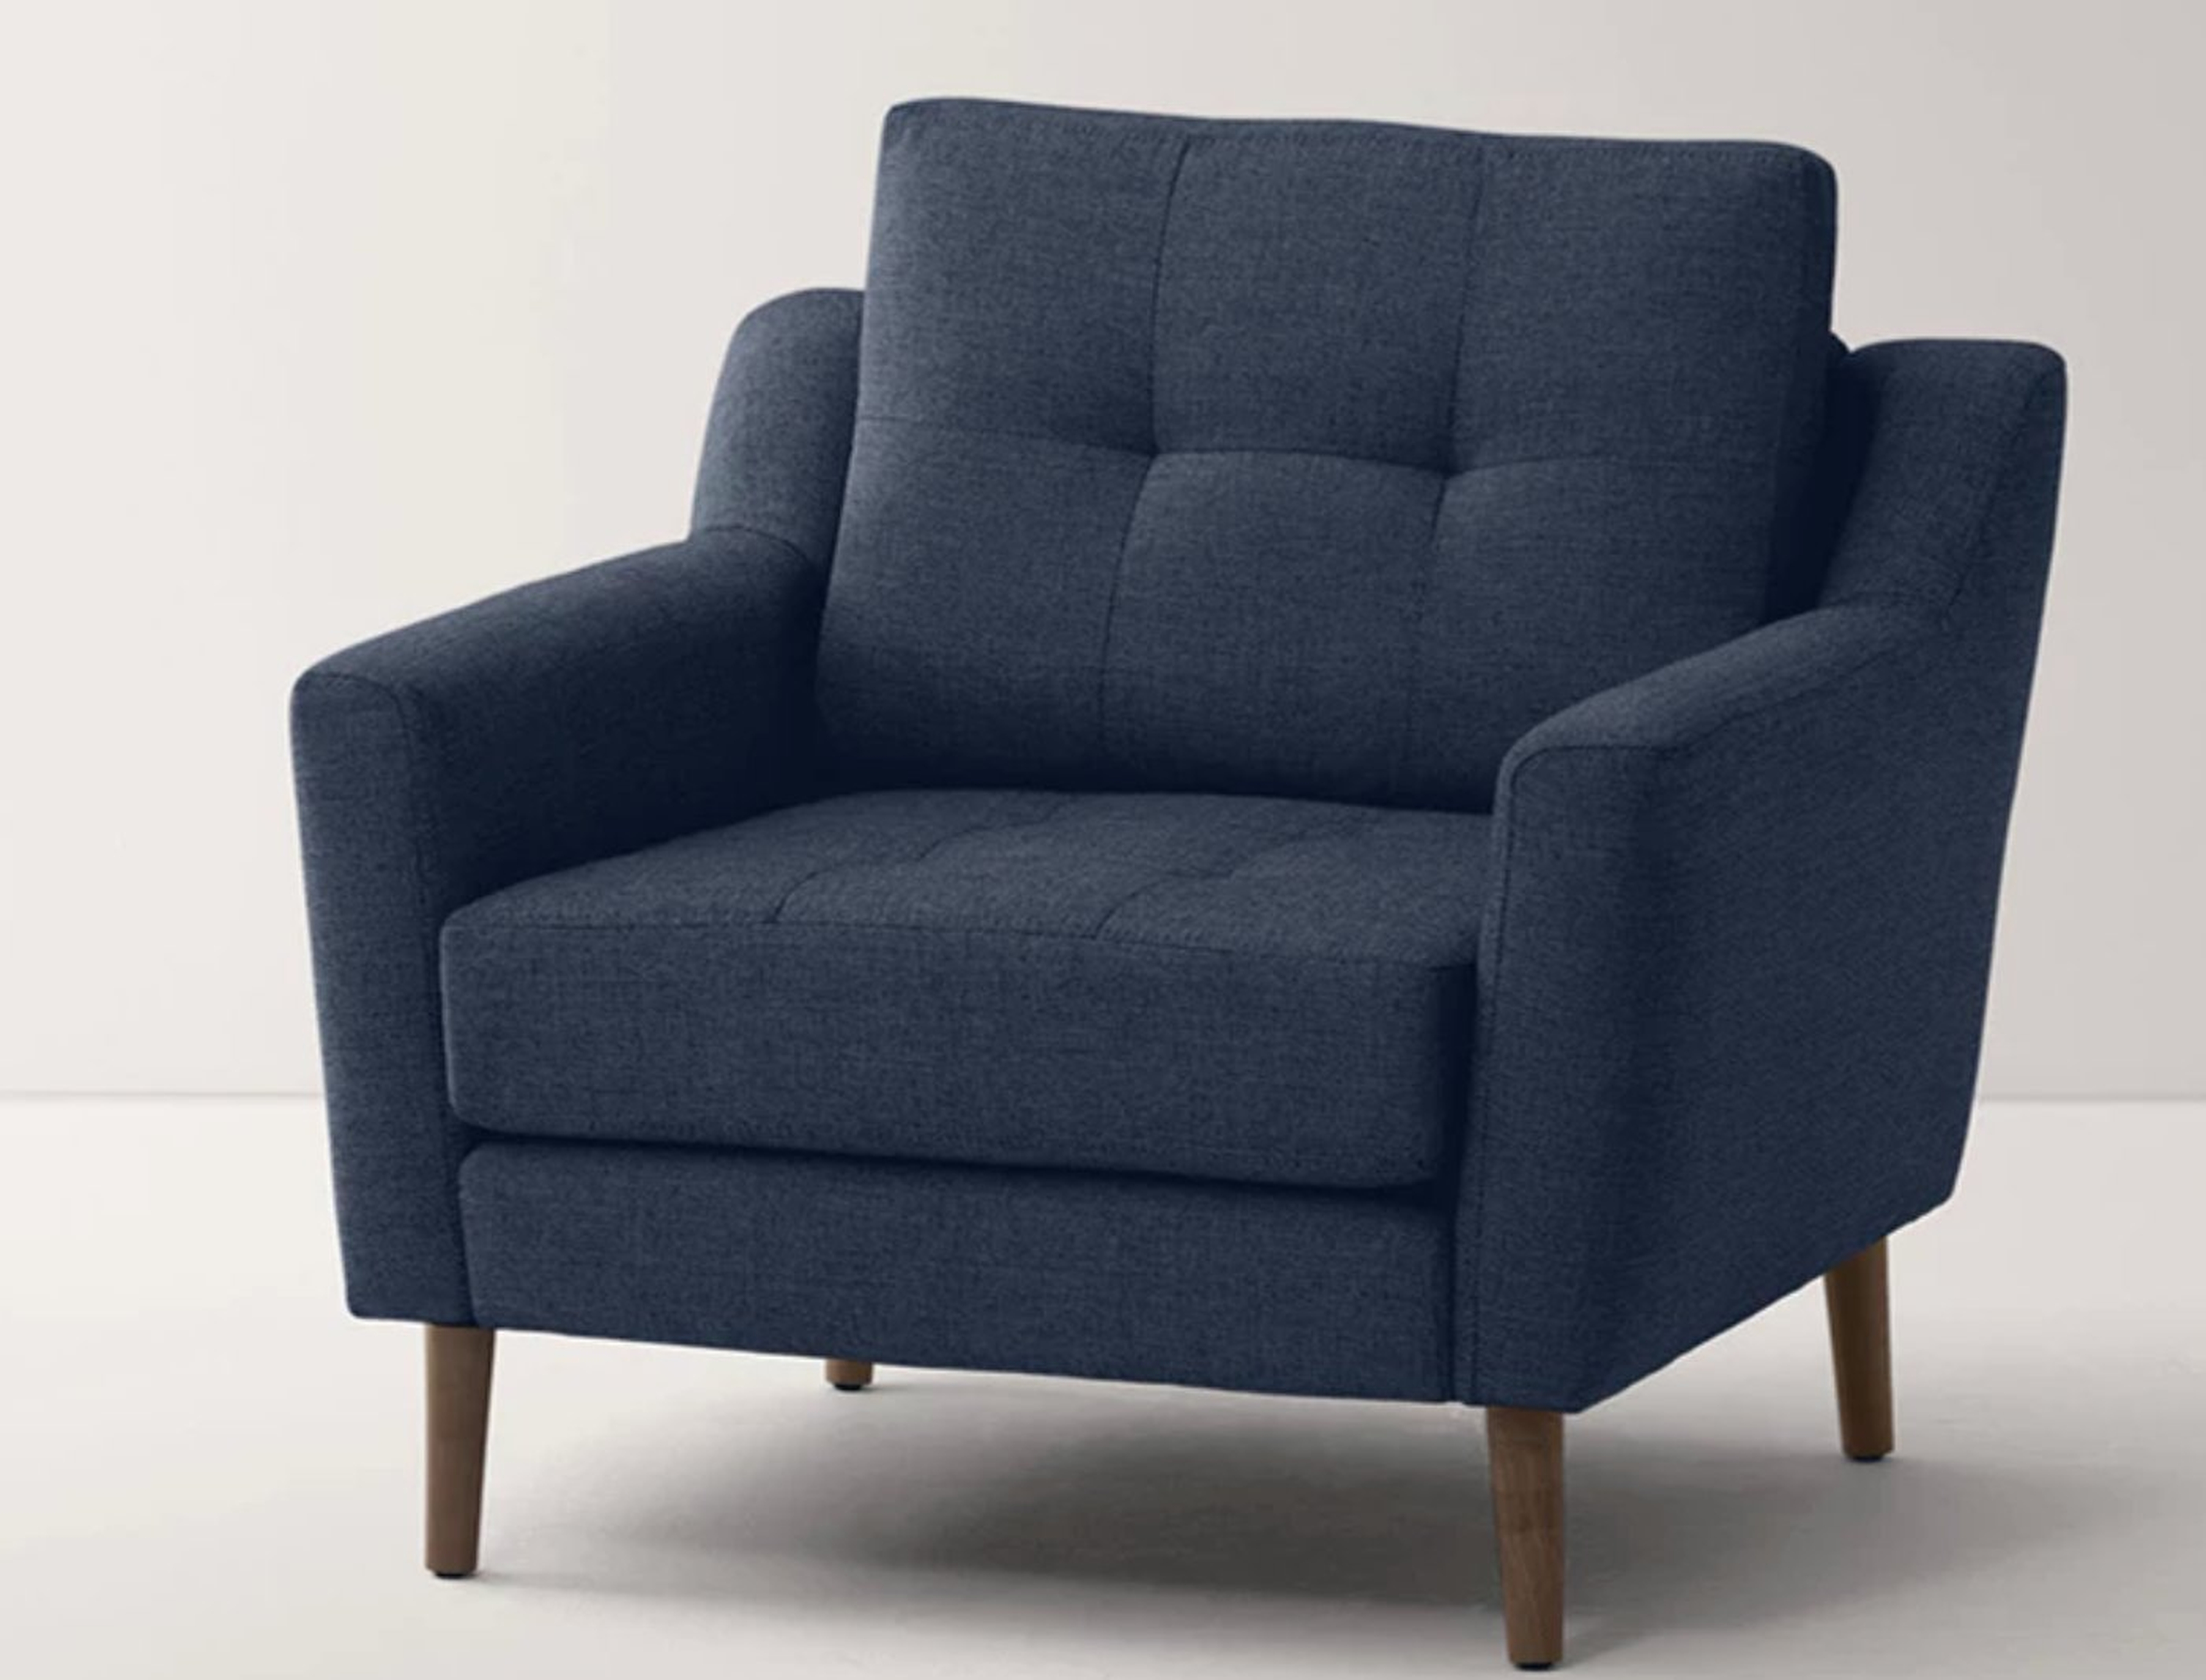 Nomad Armchair in Navy Blue - Burrow